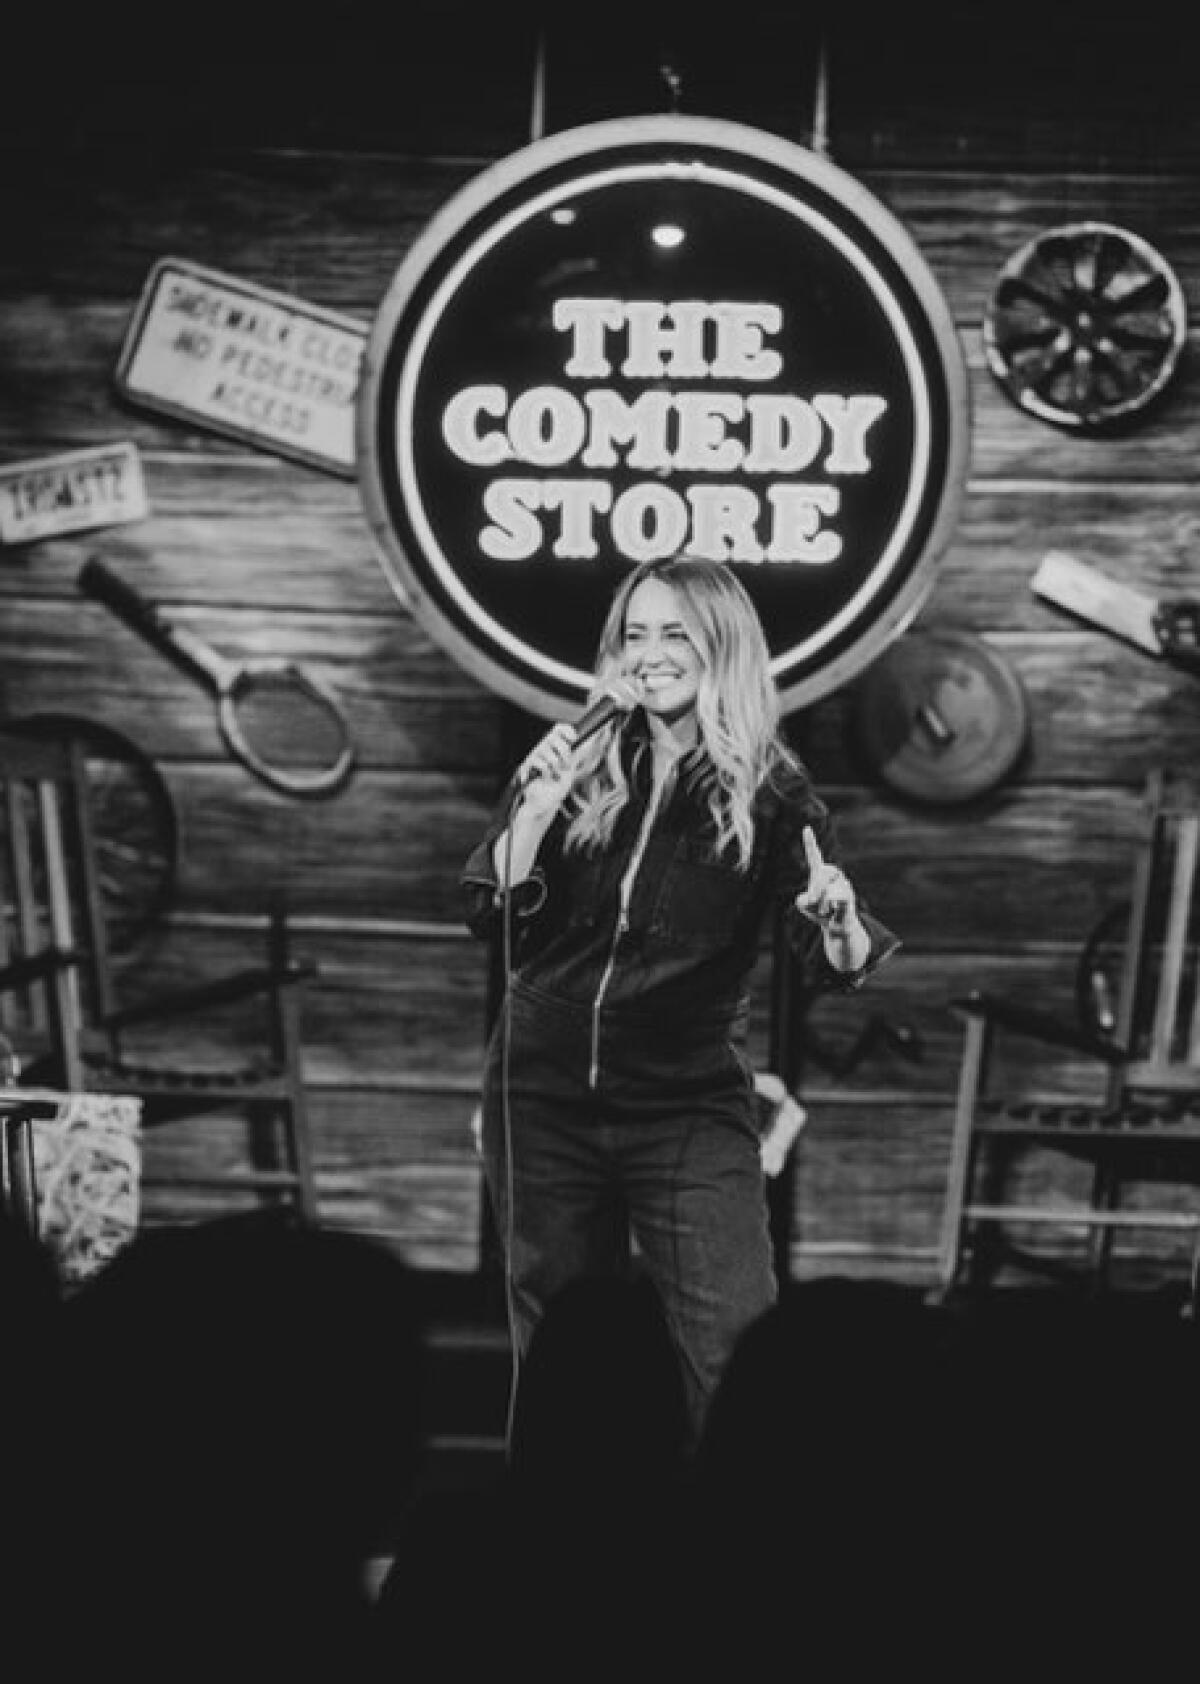 Sarah Tiana is set to release her Comedy Store special "44" in February.